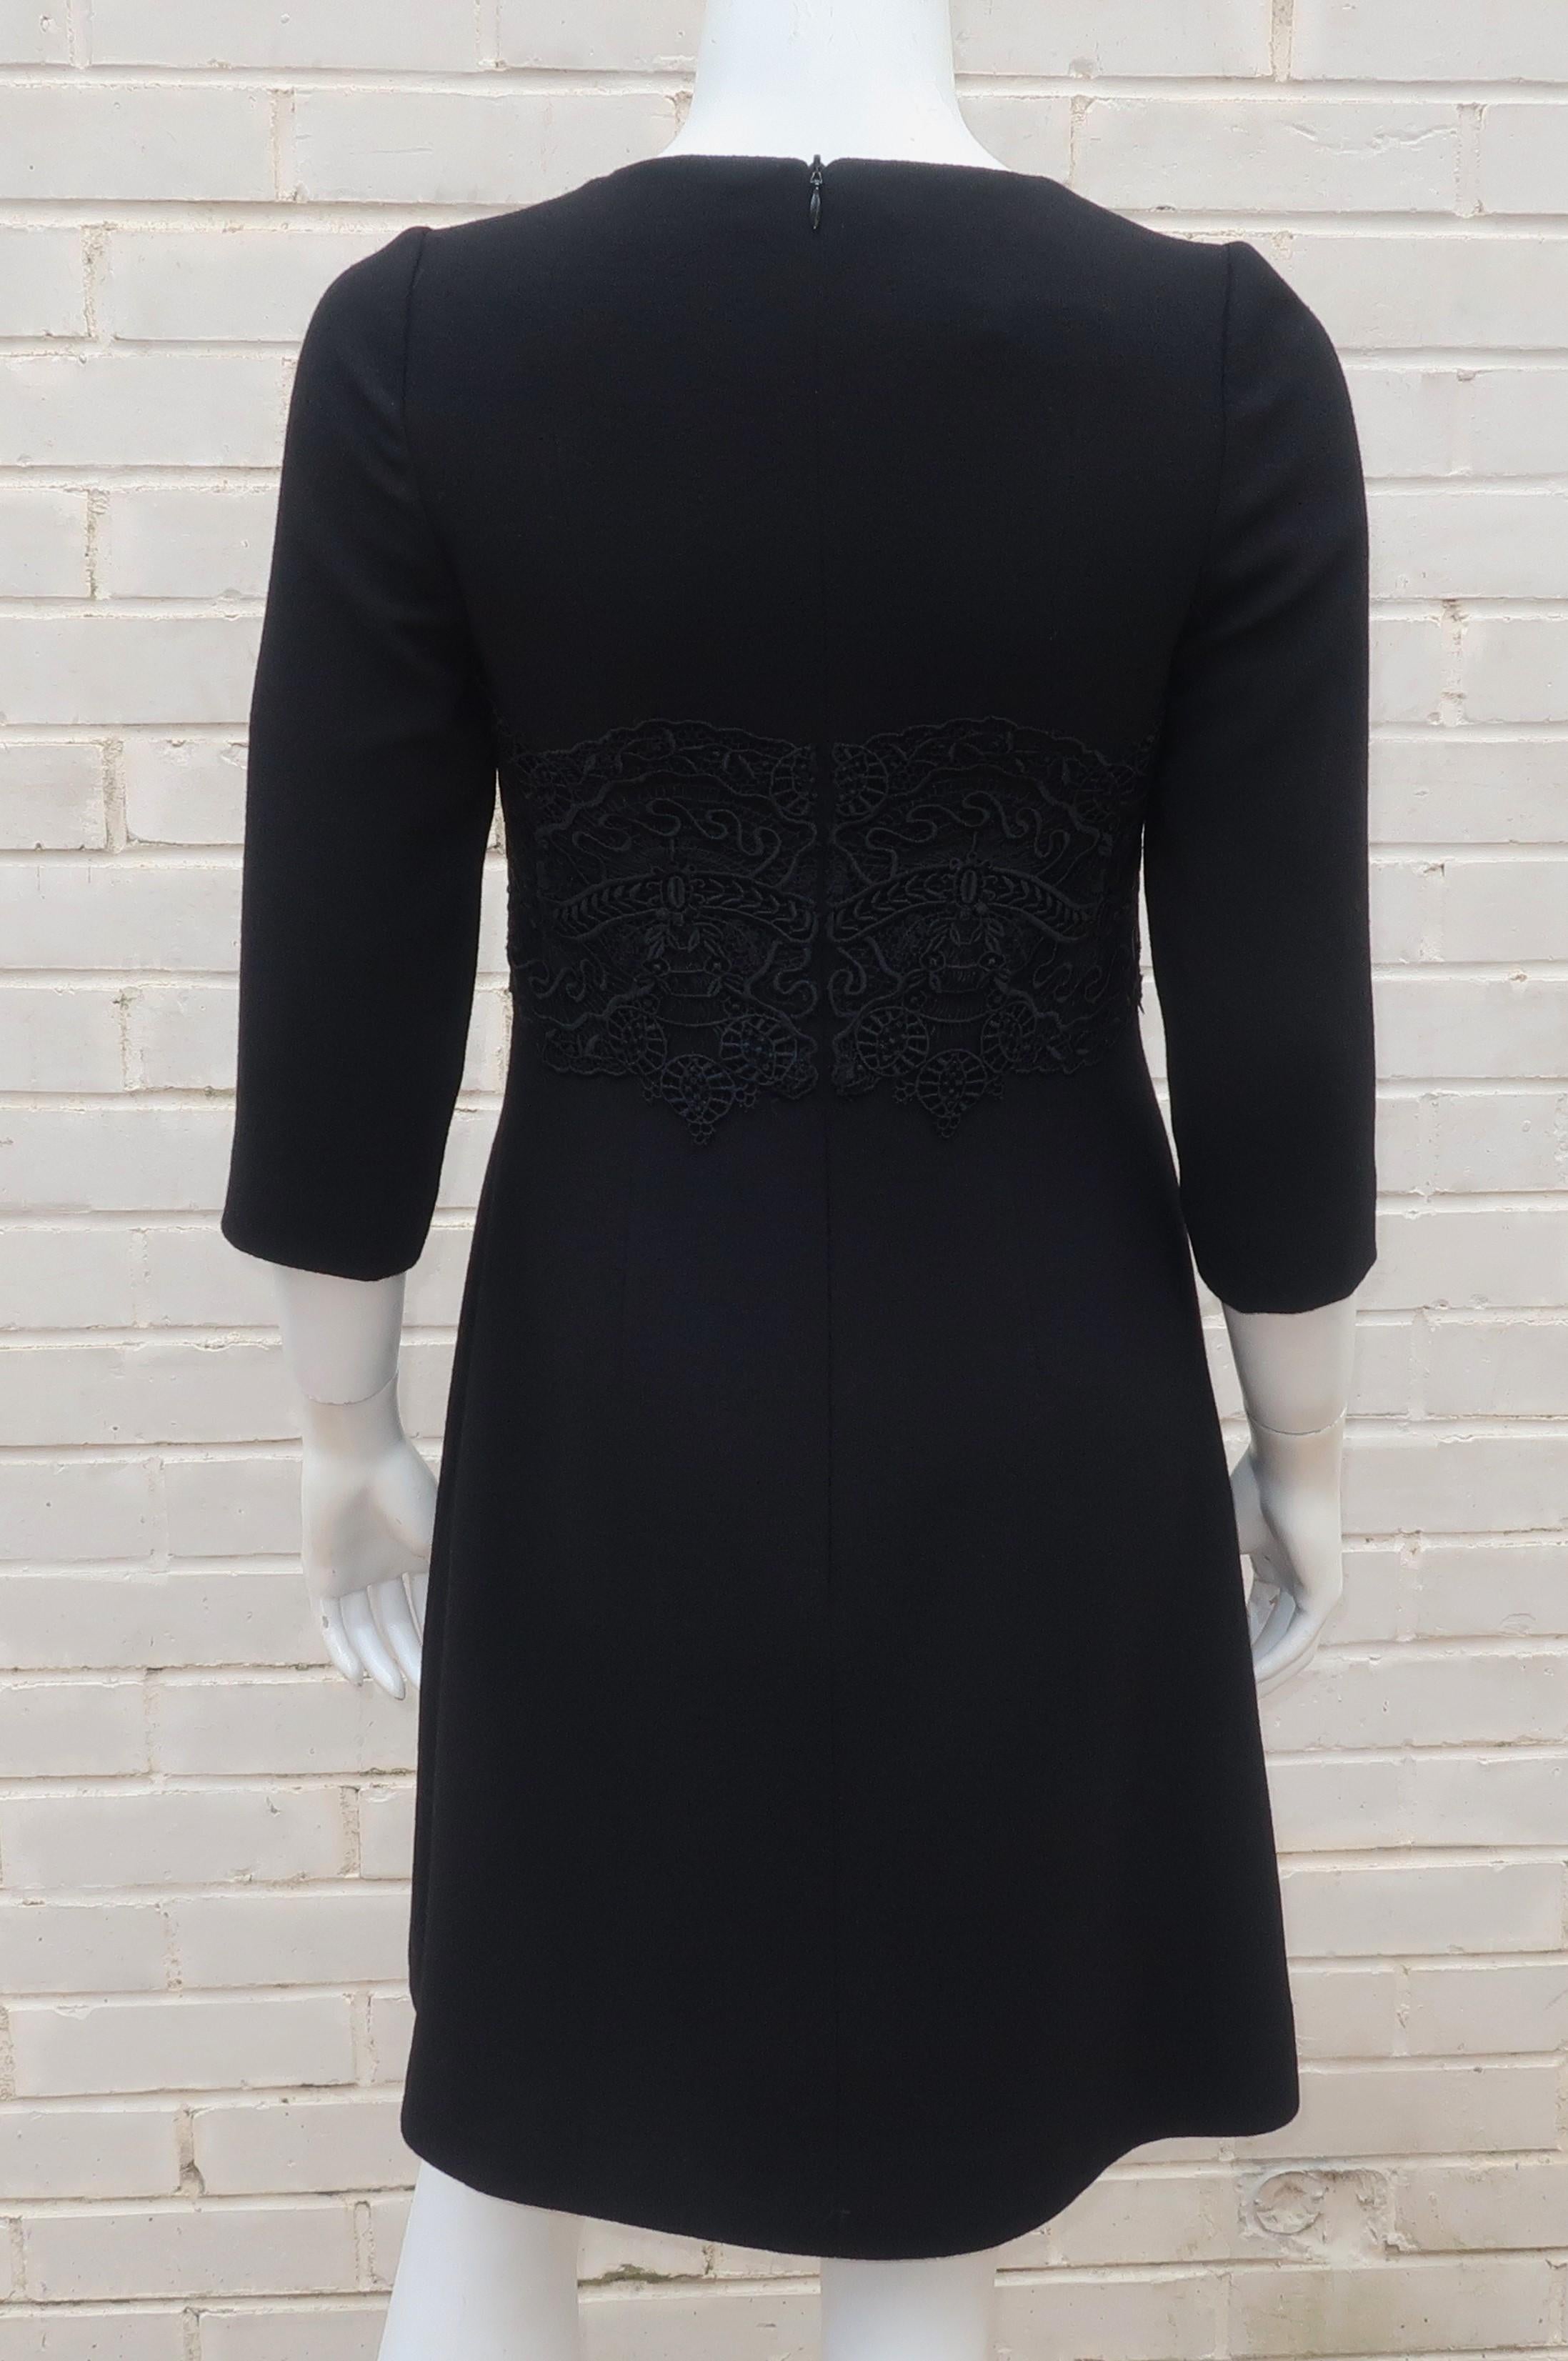 Peggy Jennings Crepe 'Little Black Dress' With Lace Accent For Sale 5